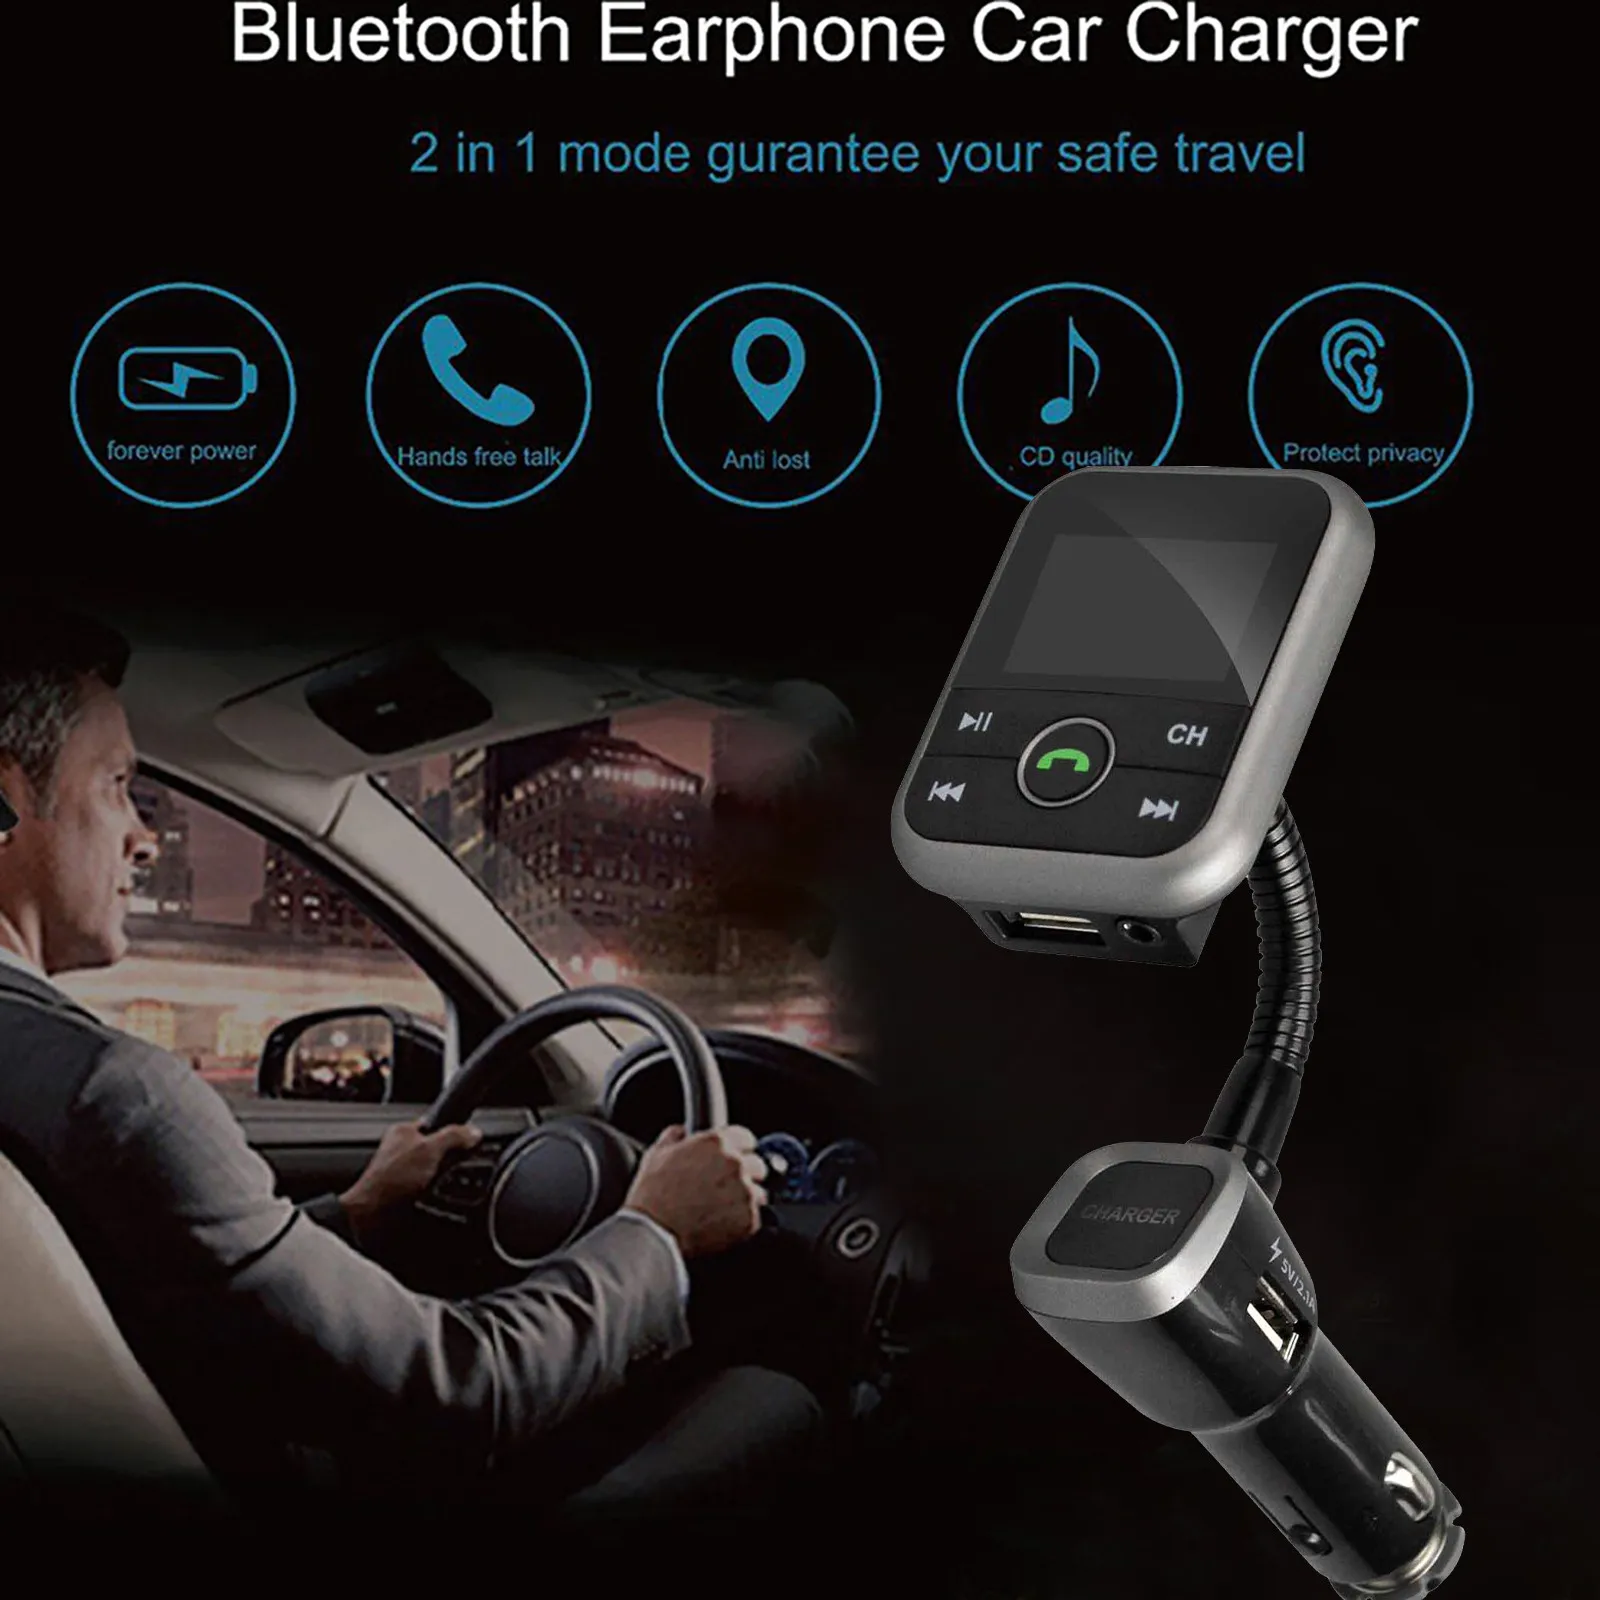 New BT67 Bluetooth Handsfree Car Kit With FM Transmitter And 2USB 2.1A Charger Mp3 play Aux In SD Card For IOS Android Phone